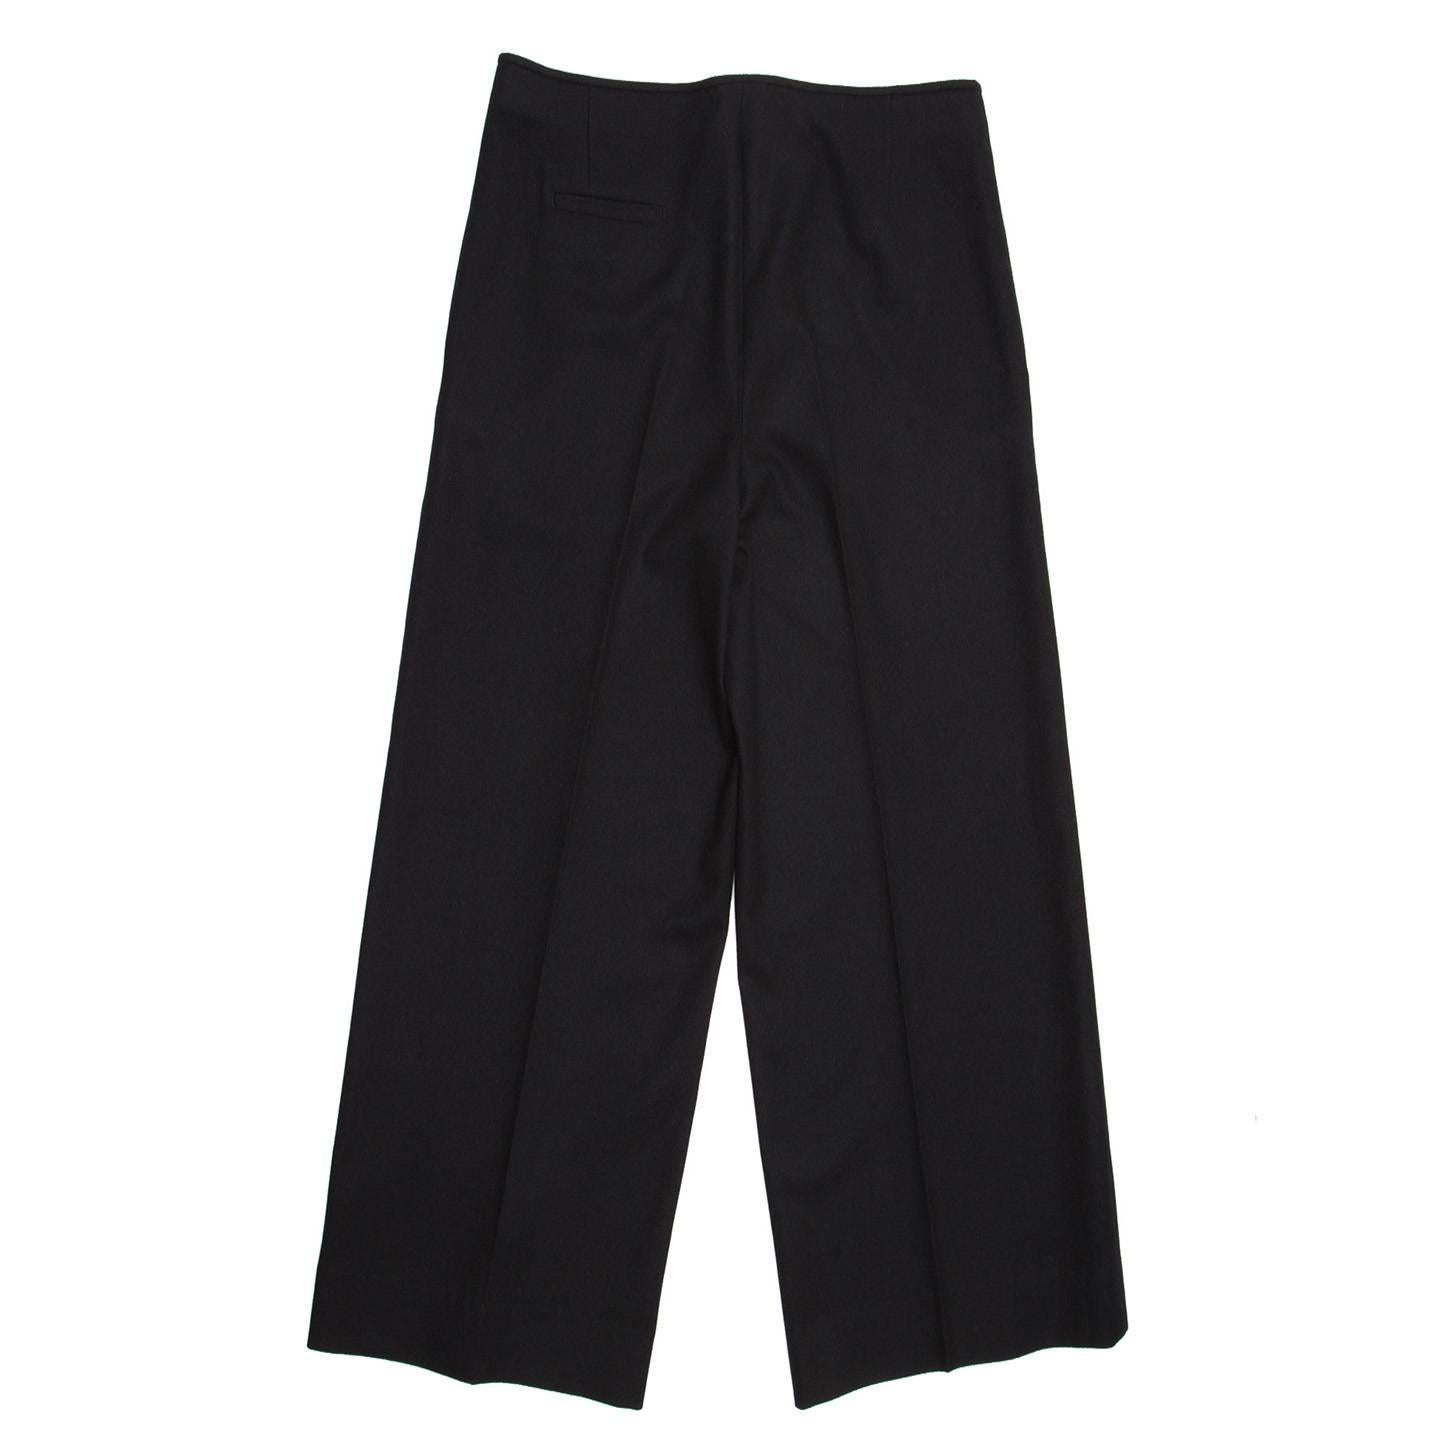 Jil Sander Black Wool Cropped Trousers In Excellent Condition For Sale In Brooklyn, NY